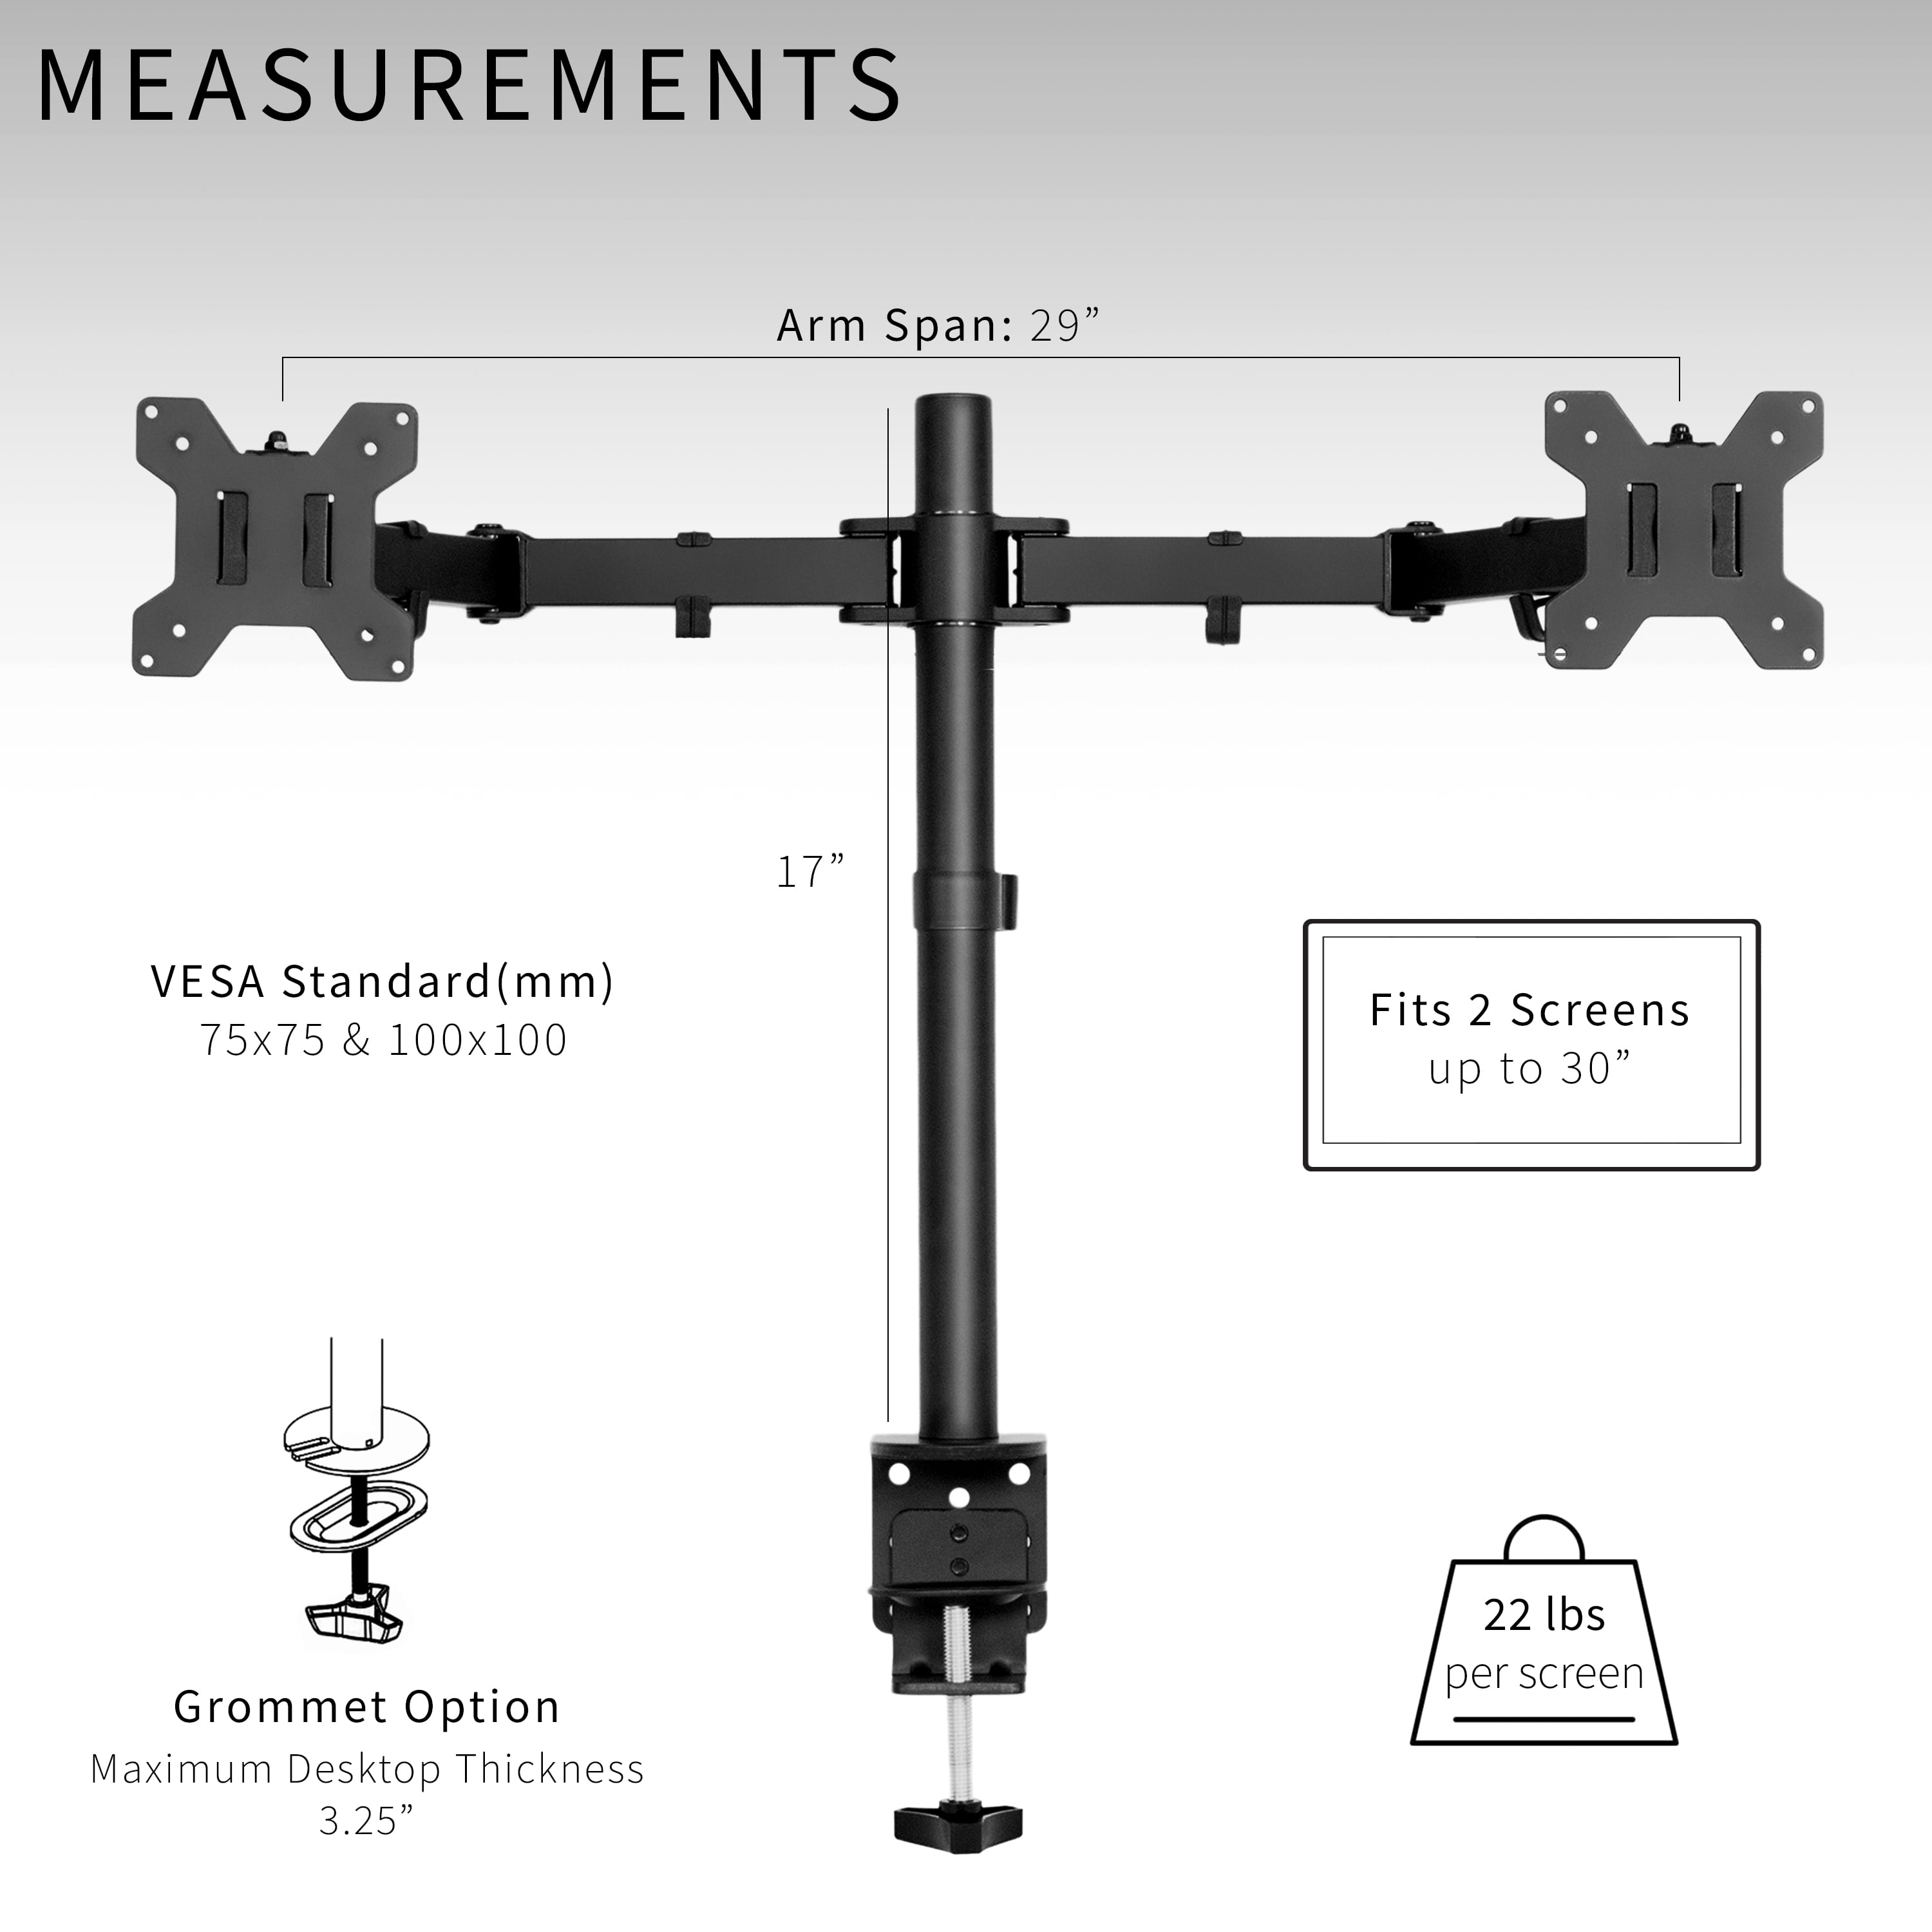 VIVO Dual Monitor Desk Mount, Heavy Duty Fully Adjustable Steel Stand,  Holds 2 Computer Screens up to 30 inches and Max 22lbs Each, Black,  STAND-V002